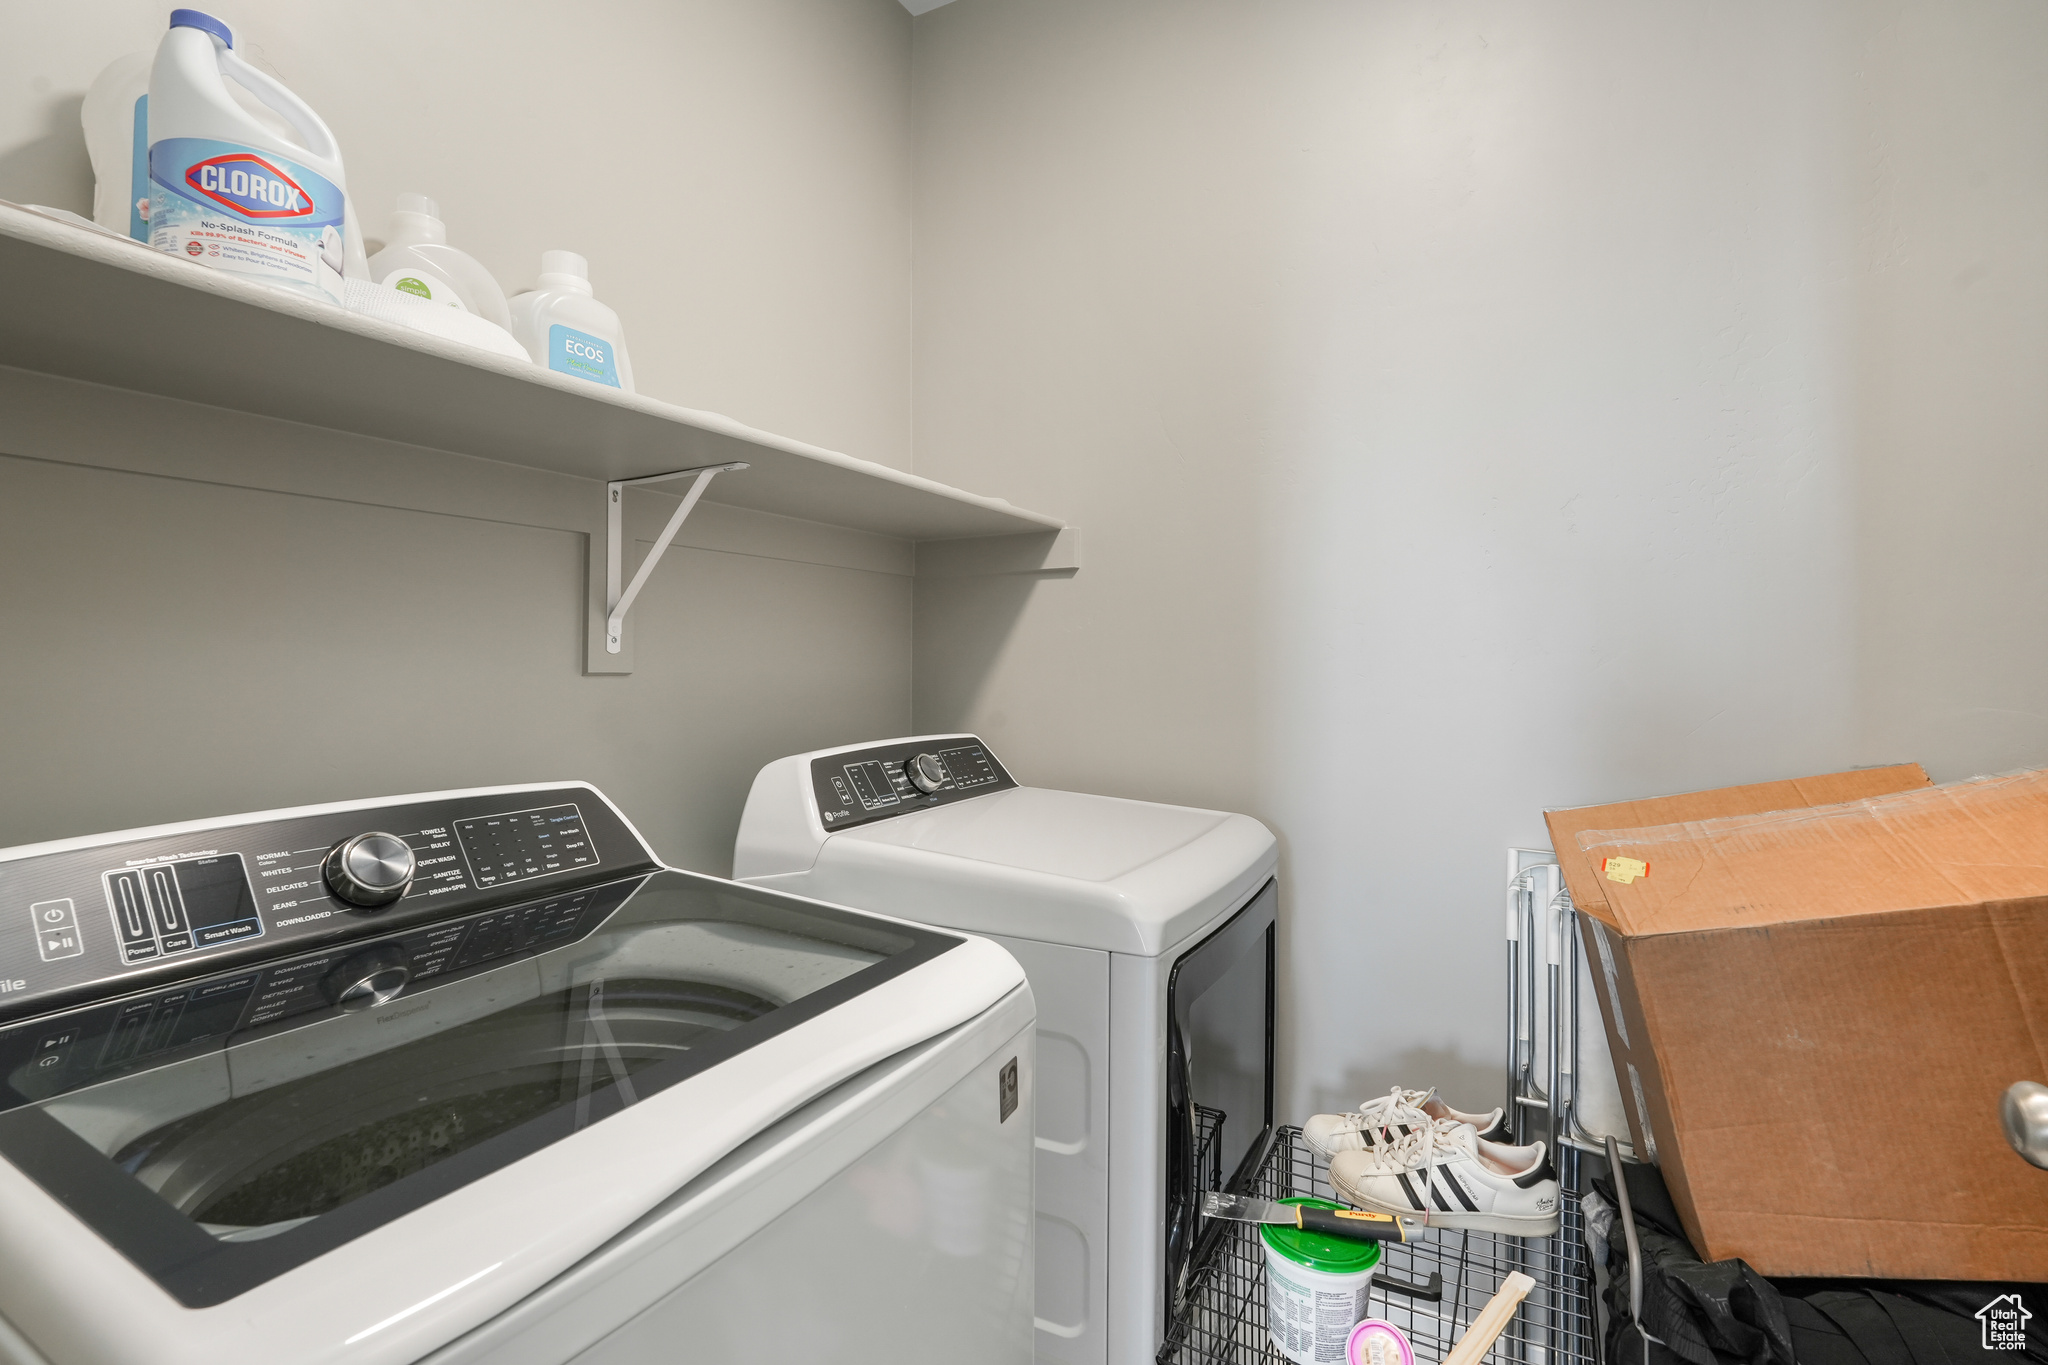 Laundry area featuring washing machine and clothes dryer